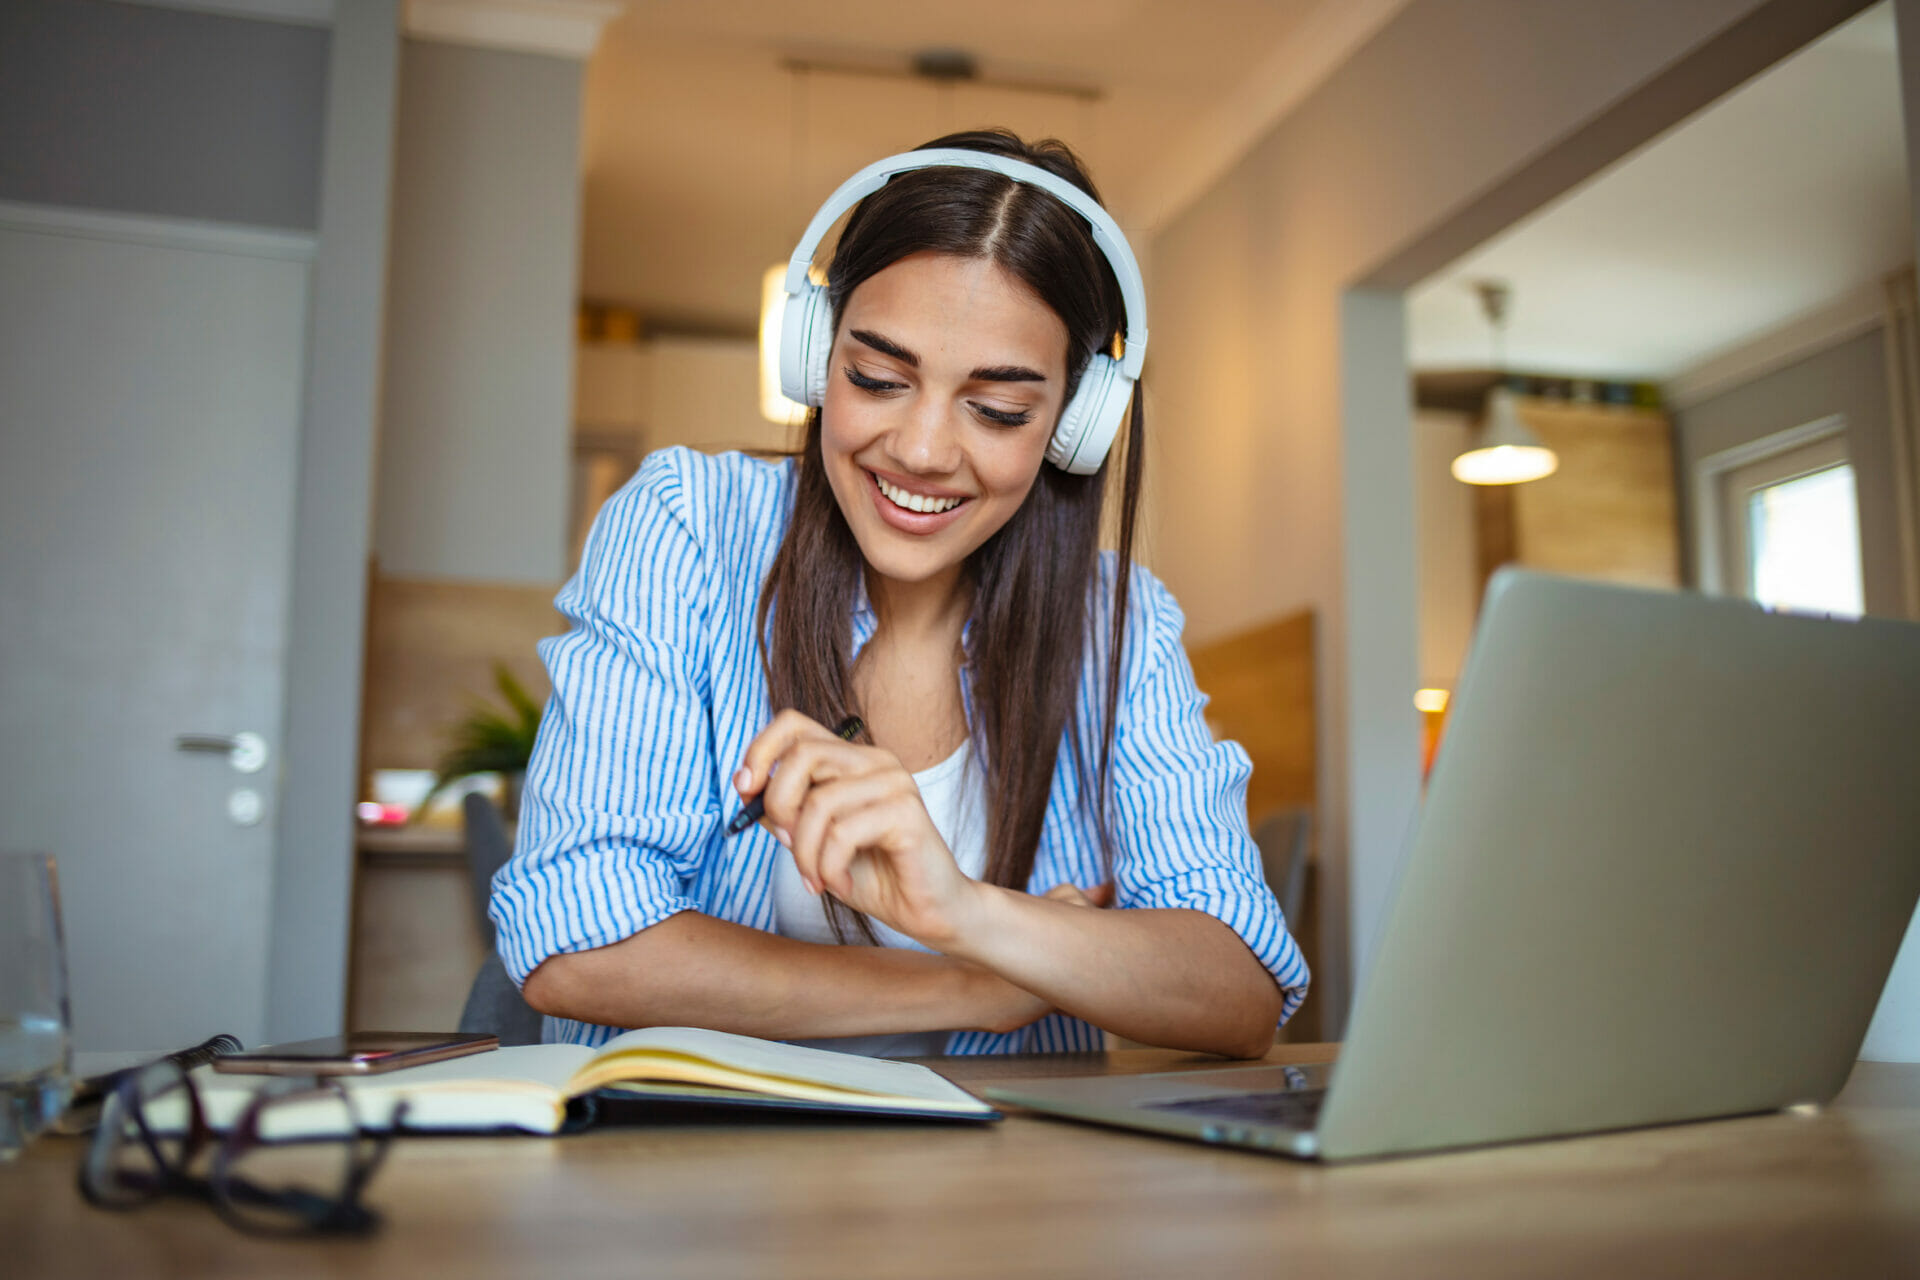 Female student with headphones on learning online, smiling.